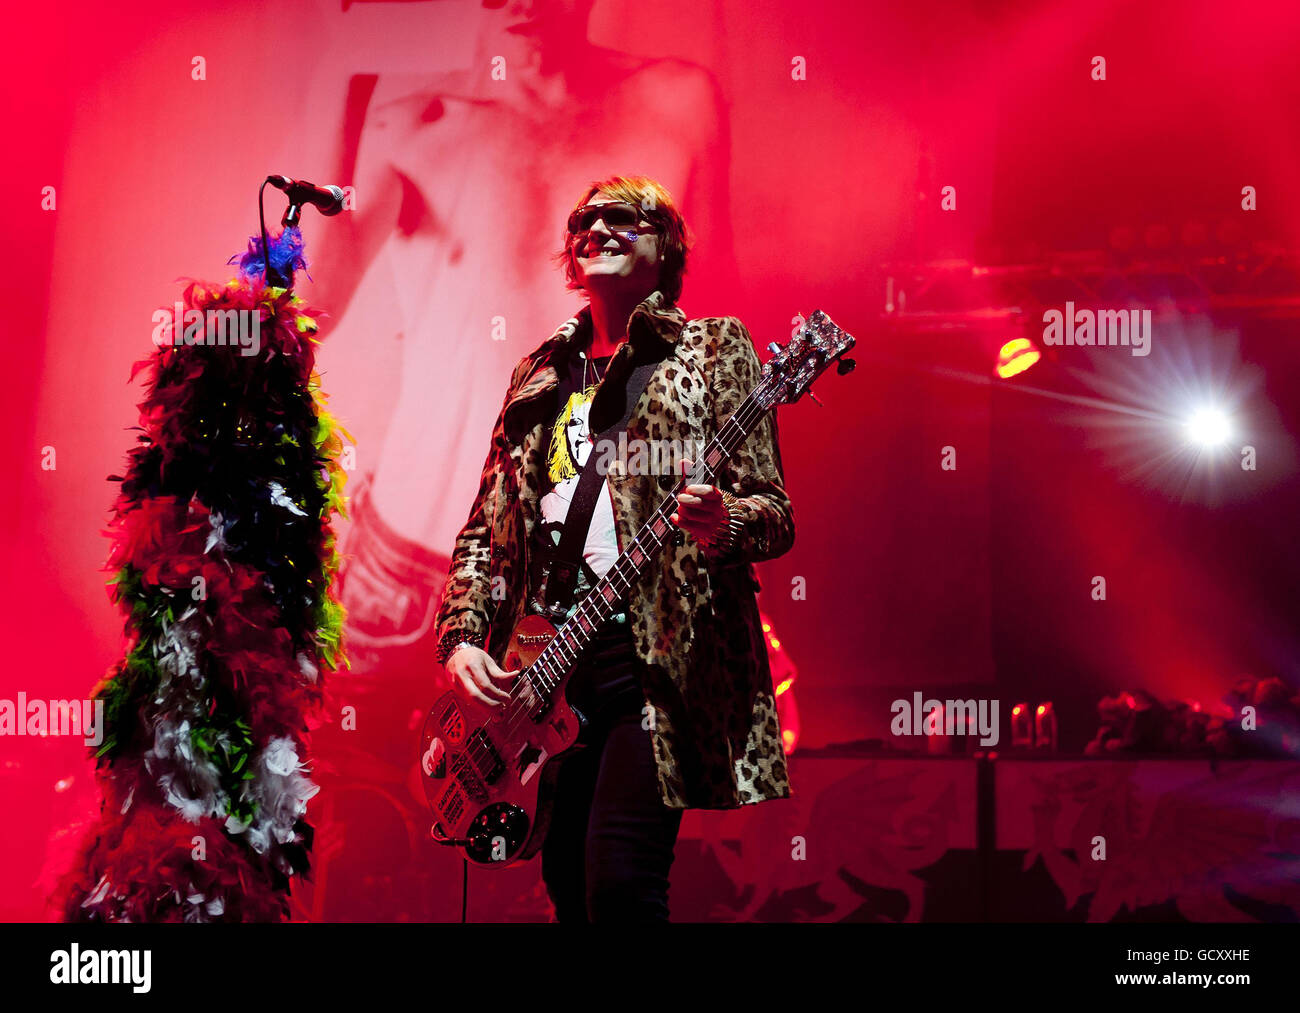 Nicky Wire of the Manic Street Preachers performs live at the XFM Winter Wonderland concert, at the O2 Brixton Academy in south London. Stock Photo